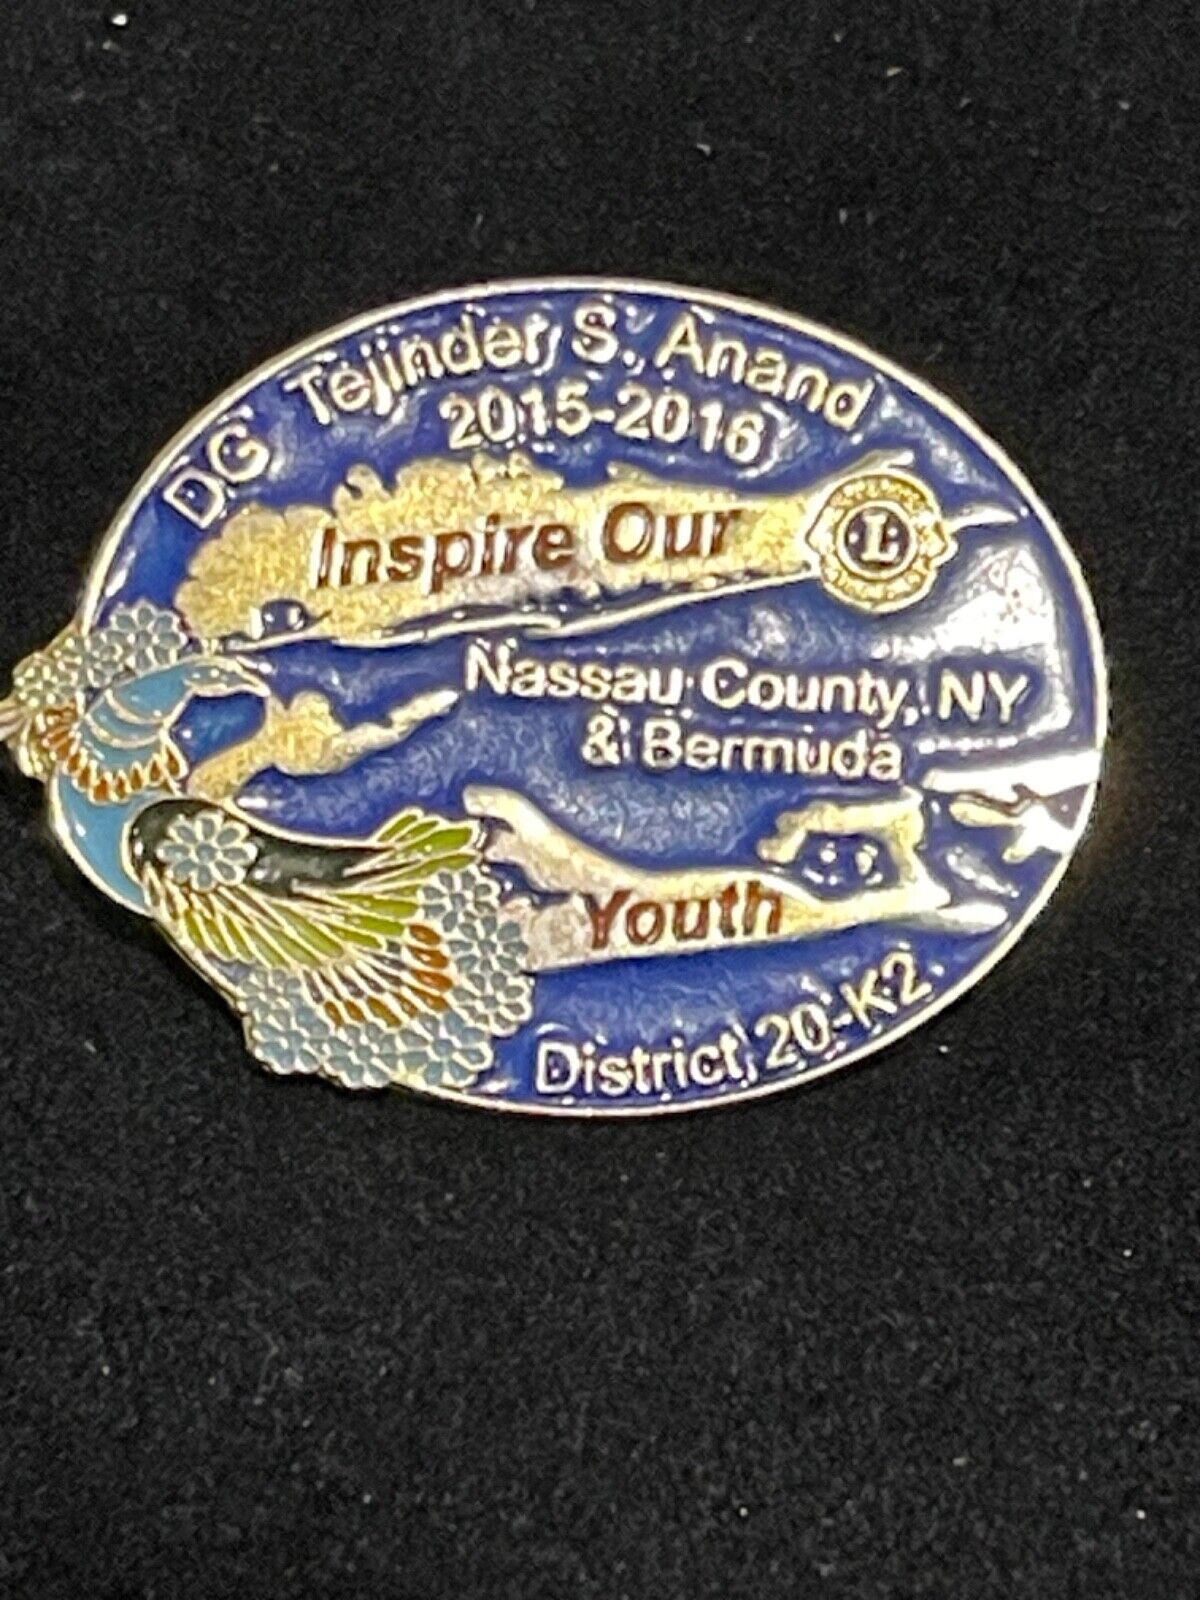 Vintage Lions Club District 20-K2 Nassau County, NY & Bermuda Pin with Gift Box